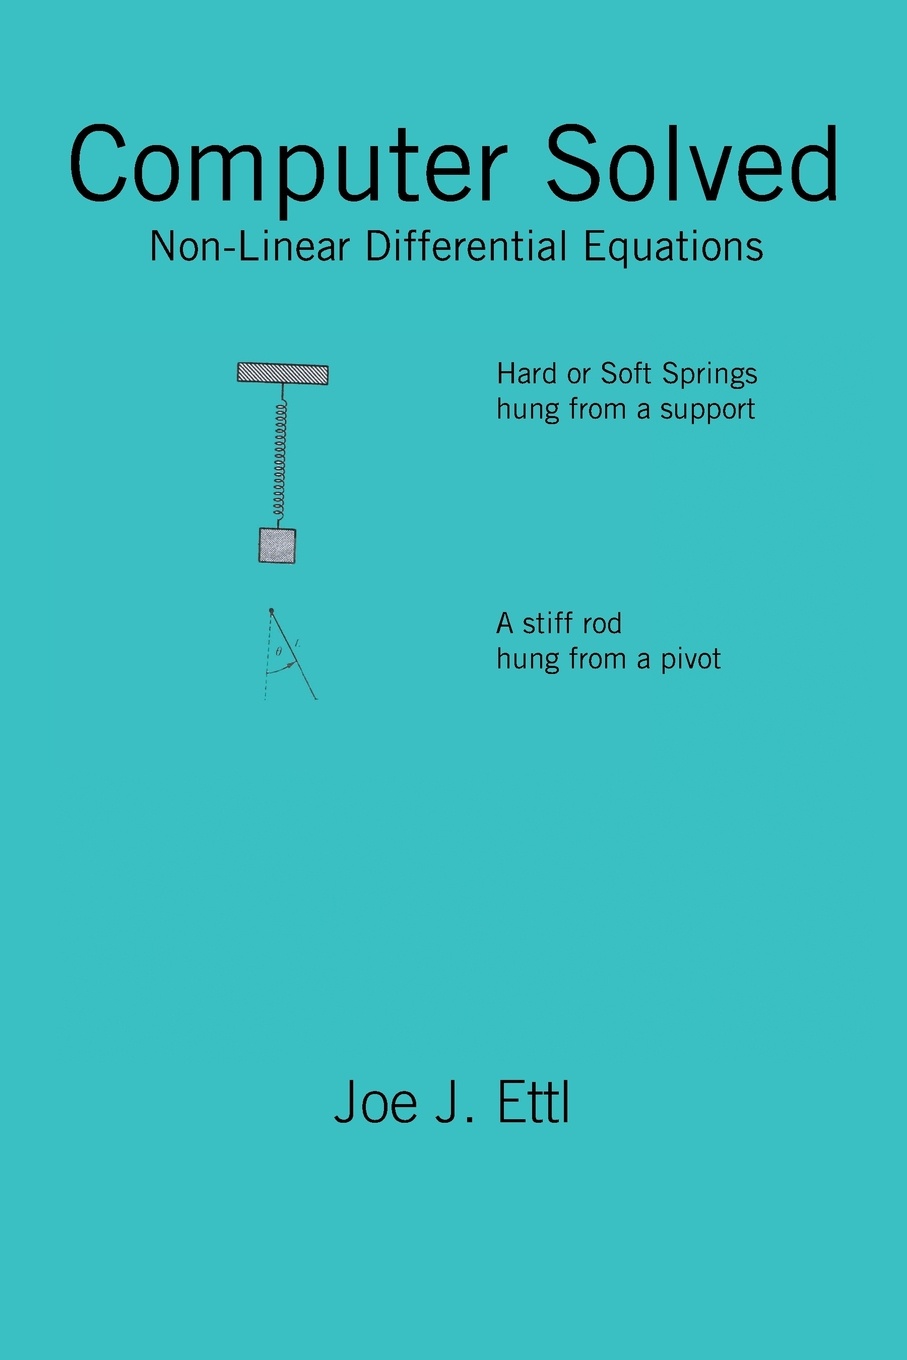 Computer Solved. Nonlinear Differential Equations